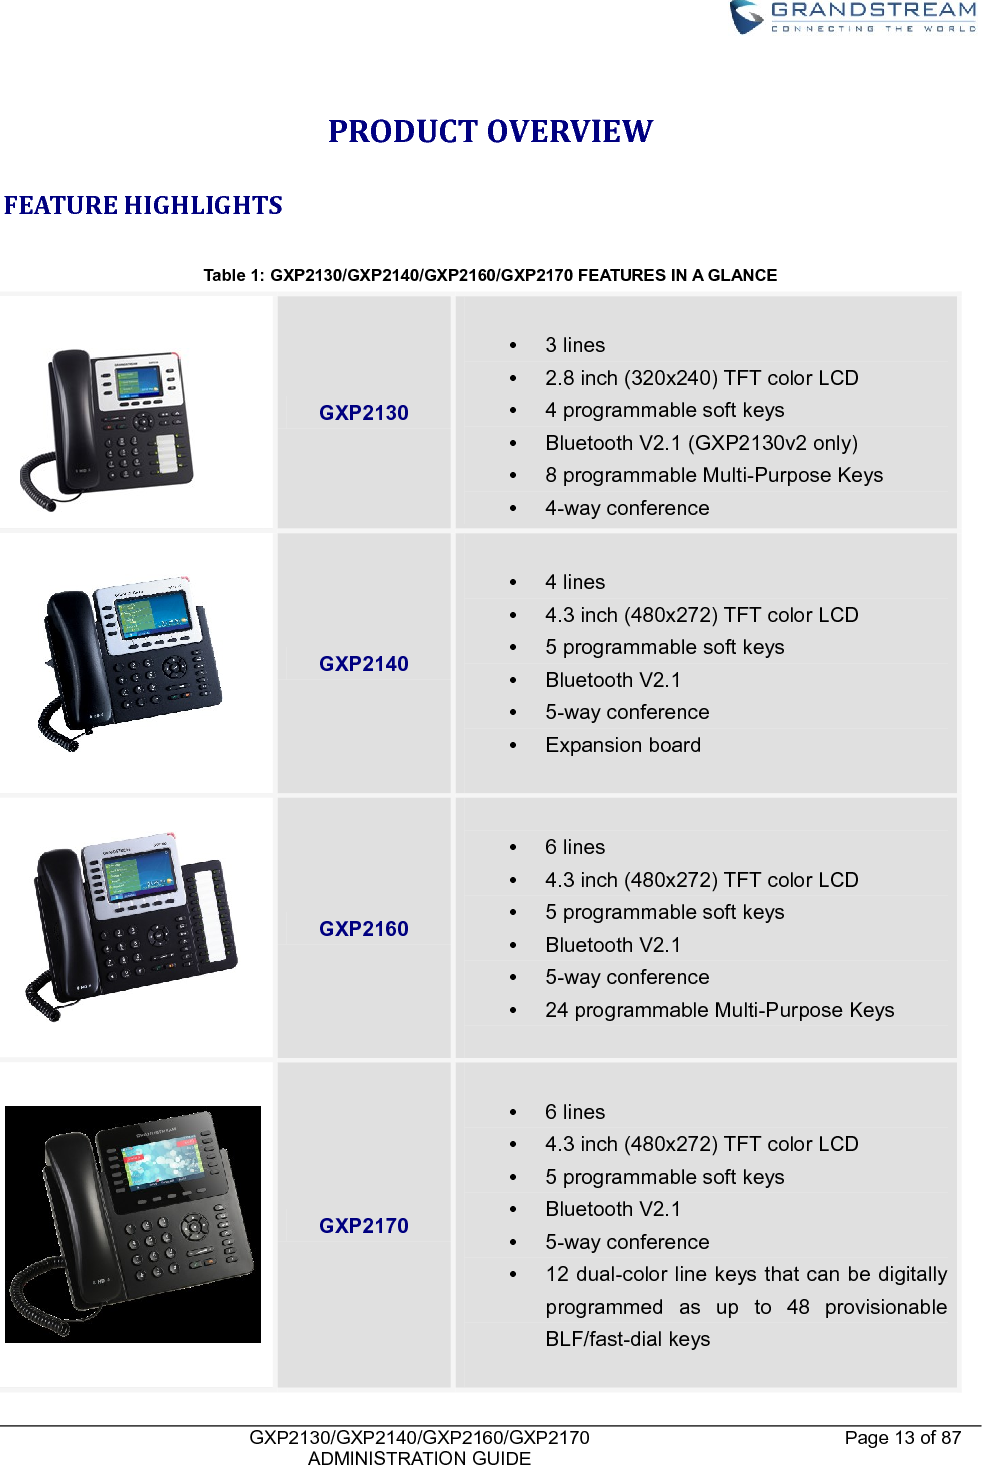    GXP2130/GXP2140/GXP2160/GXP2170   ADMINISTRATION GUIDE Page 13 of 87     PRODUCT OVERVIEW FEATURE HIGHLIGHTS  Table 1: GXP2130/GXP2140/GXP2160/GXP2170 FEATURES IN A GLANCE      GXP2130    3 lines  2.8 inch (320x240) TFT color LCD   4 programmable soft keys   Bluetooth V2.1 (GXP2130v2 only)   8 programmable Multi-Purpose Keys     4-way conference   GXP2140    4 lines   4.3 inch (480x272) TFT color LCD   5 programmable soft keys   Bluetooth V2.1   5-way conference   Expansion board    GXP2160    6 lines   4.3 inch (480x272) TFT color LCD   5 programmable soft keys   Bluetooth V2.1   5-way conference  24 programmable Multi-Purpose Keys     GXP2170   6 lines   4.3 inch (480x272) TFT color LCD   5 programmable soft keys   Bluetooth V2.1   5-way conference   12 dual-color line keys that can be digitally programmed  as  up  to  48  provisionable BLF/fast-dial keys    